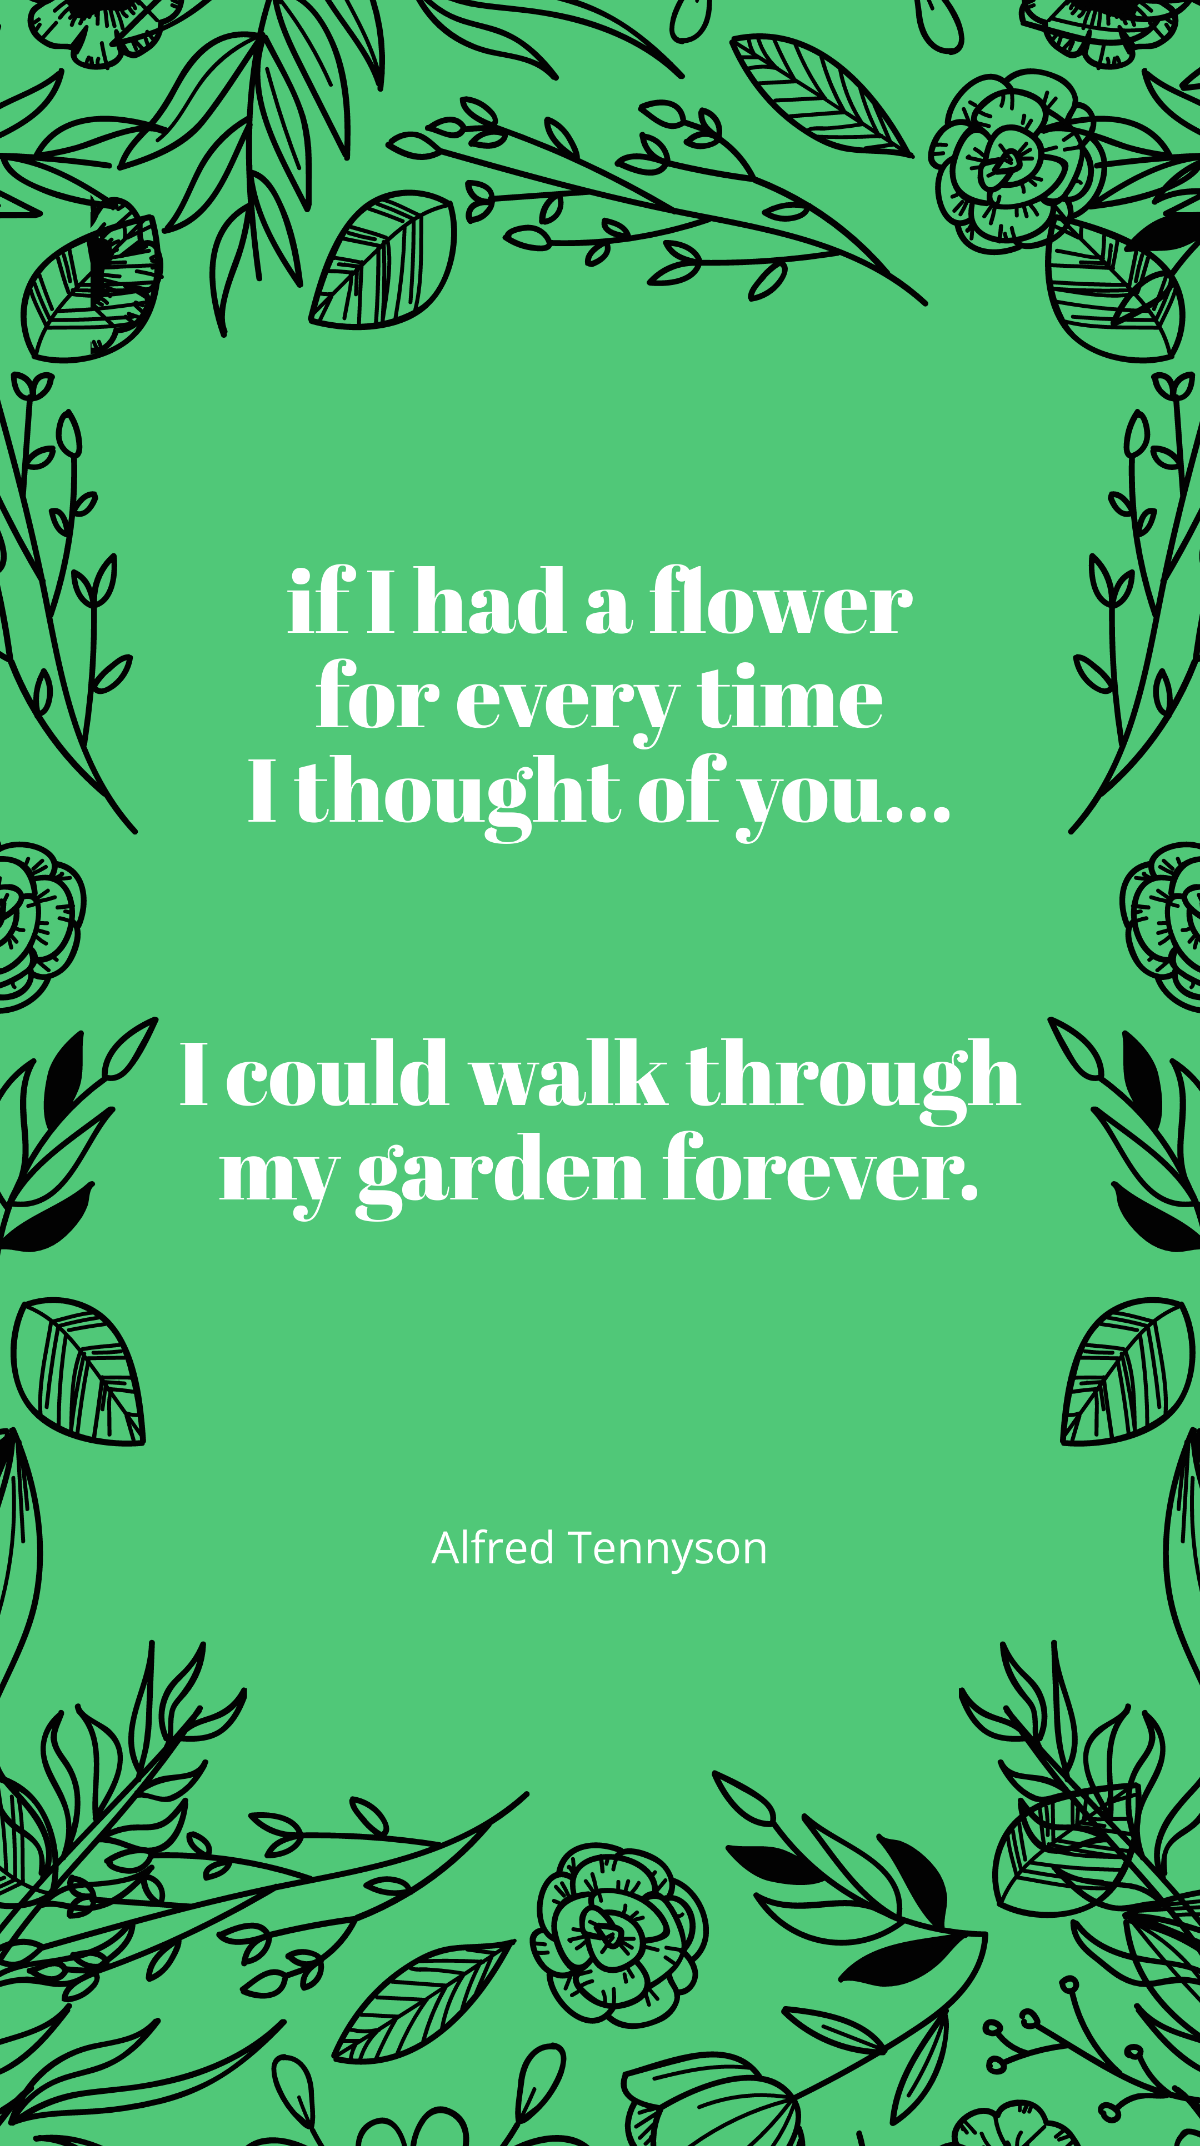 Alfred Tennyson - “If I had a flower for every time I thought of you… I could walk through my garden forever.”  Template